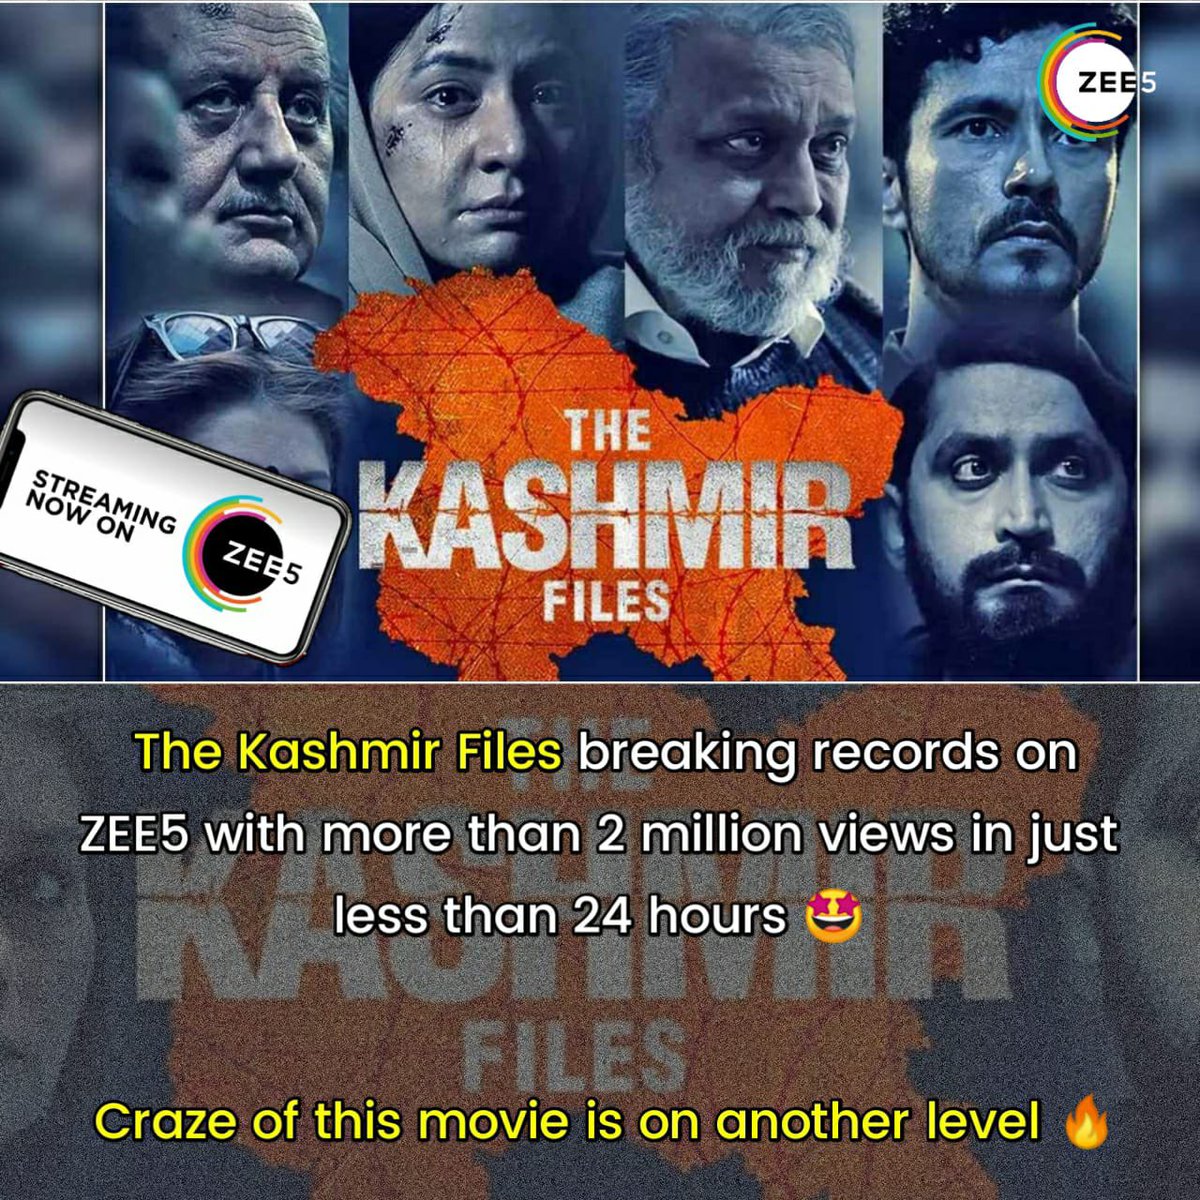 Hats off to dir @vivekagnihotri for making The Kashmir Files ..entire cast did a perfect job in their respective roles, esp. @AnupamPKher and @DarshanKumaar watch on @zee5india
#TheKashmirFilesOnZEE5